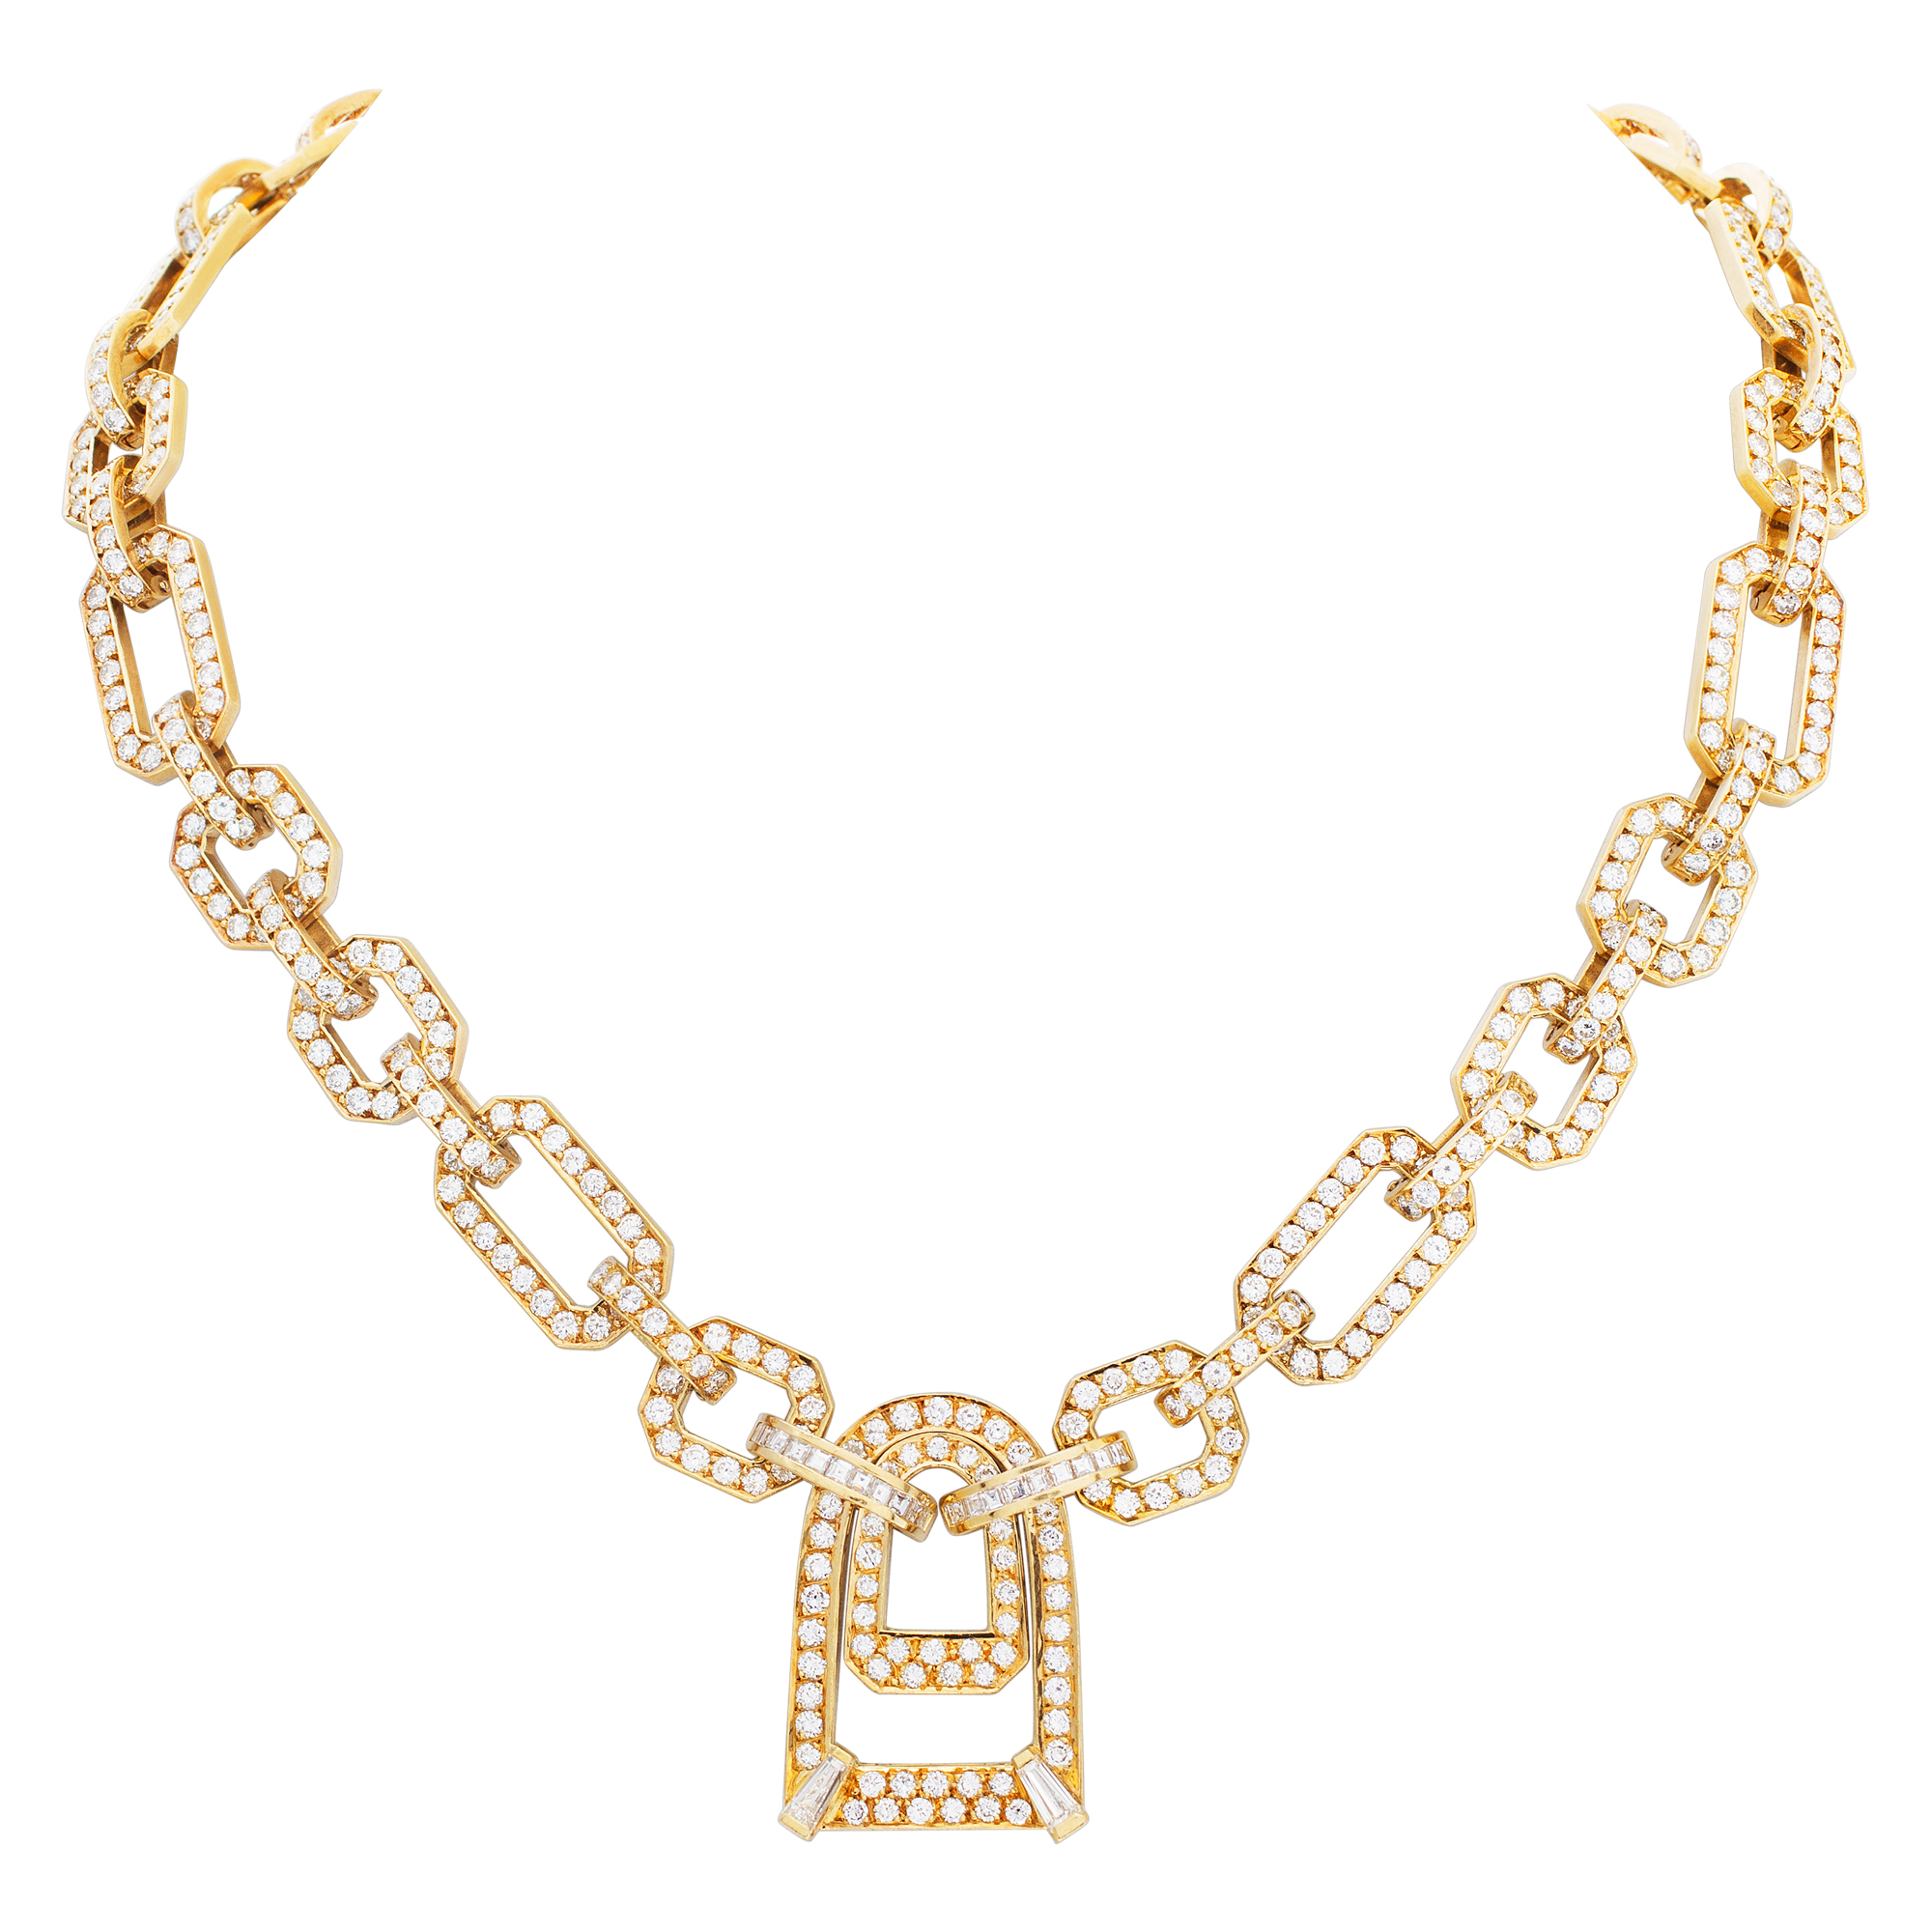 Chain link diamonds necklace set in 18K yellow gold with over 16 carats full round brilliant and baguette cut diamonds.15 inches.